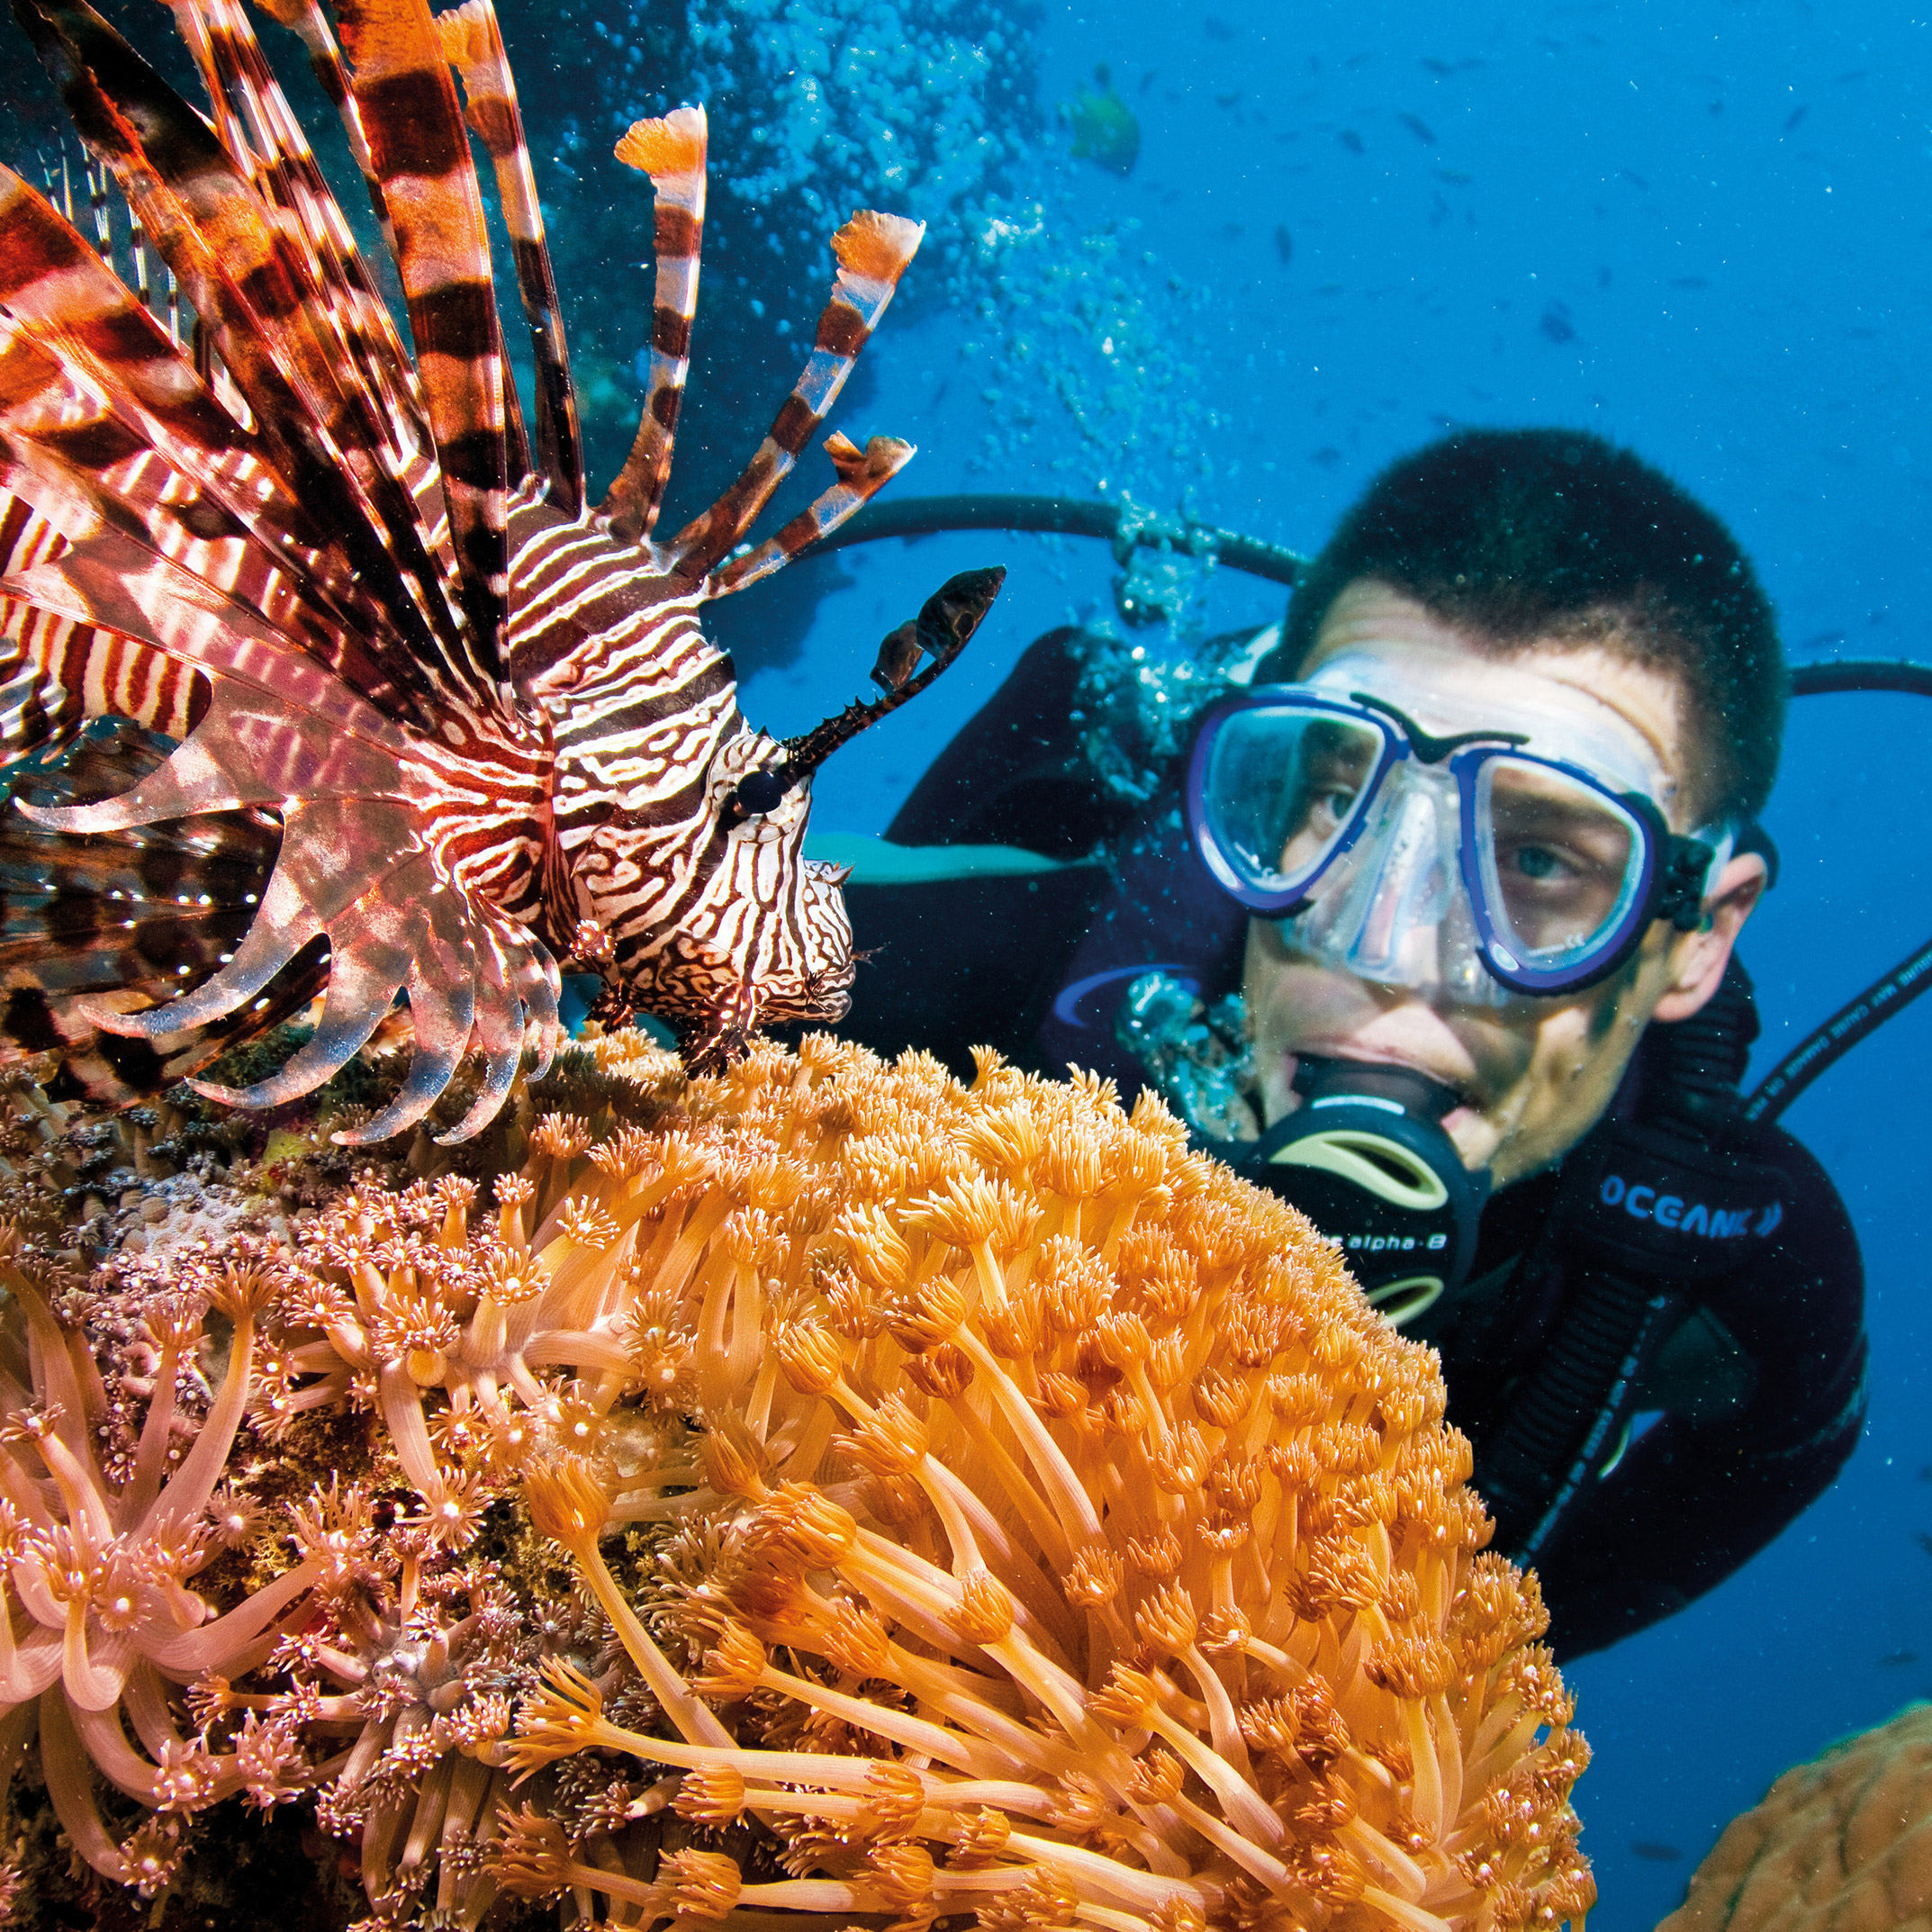 Hands-on conservation efforts in the Great Barrier Reef